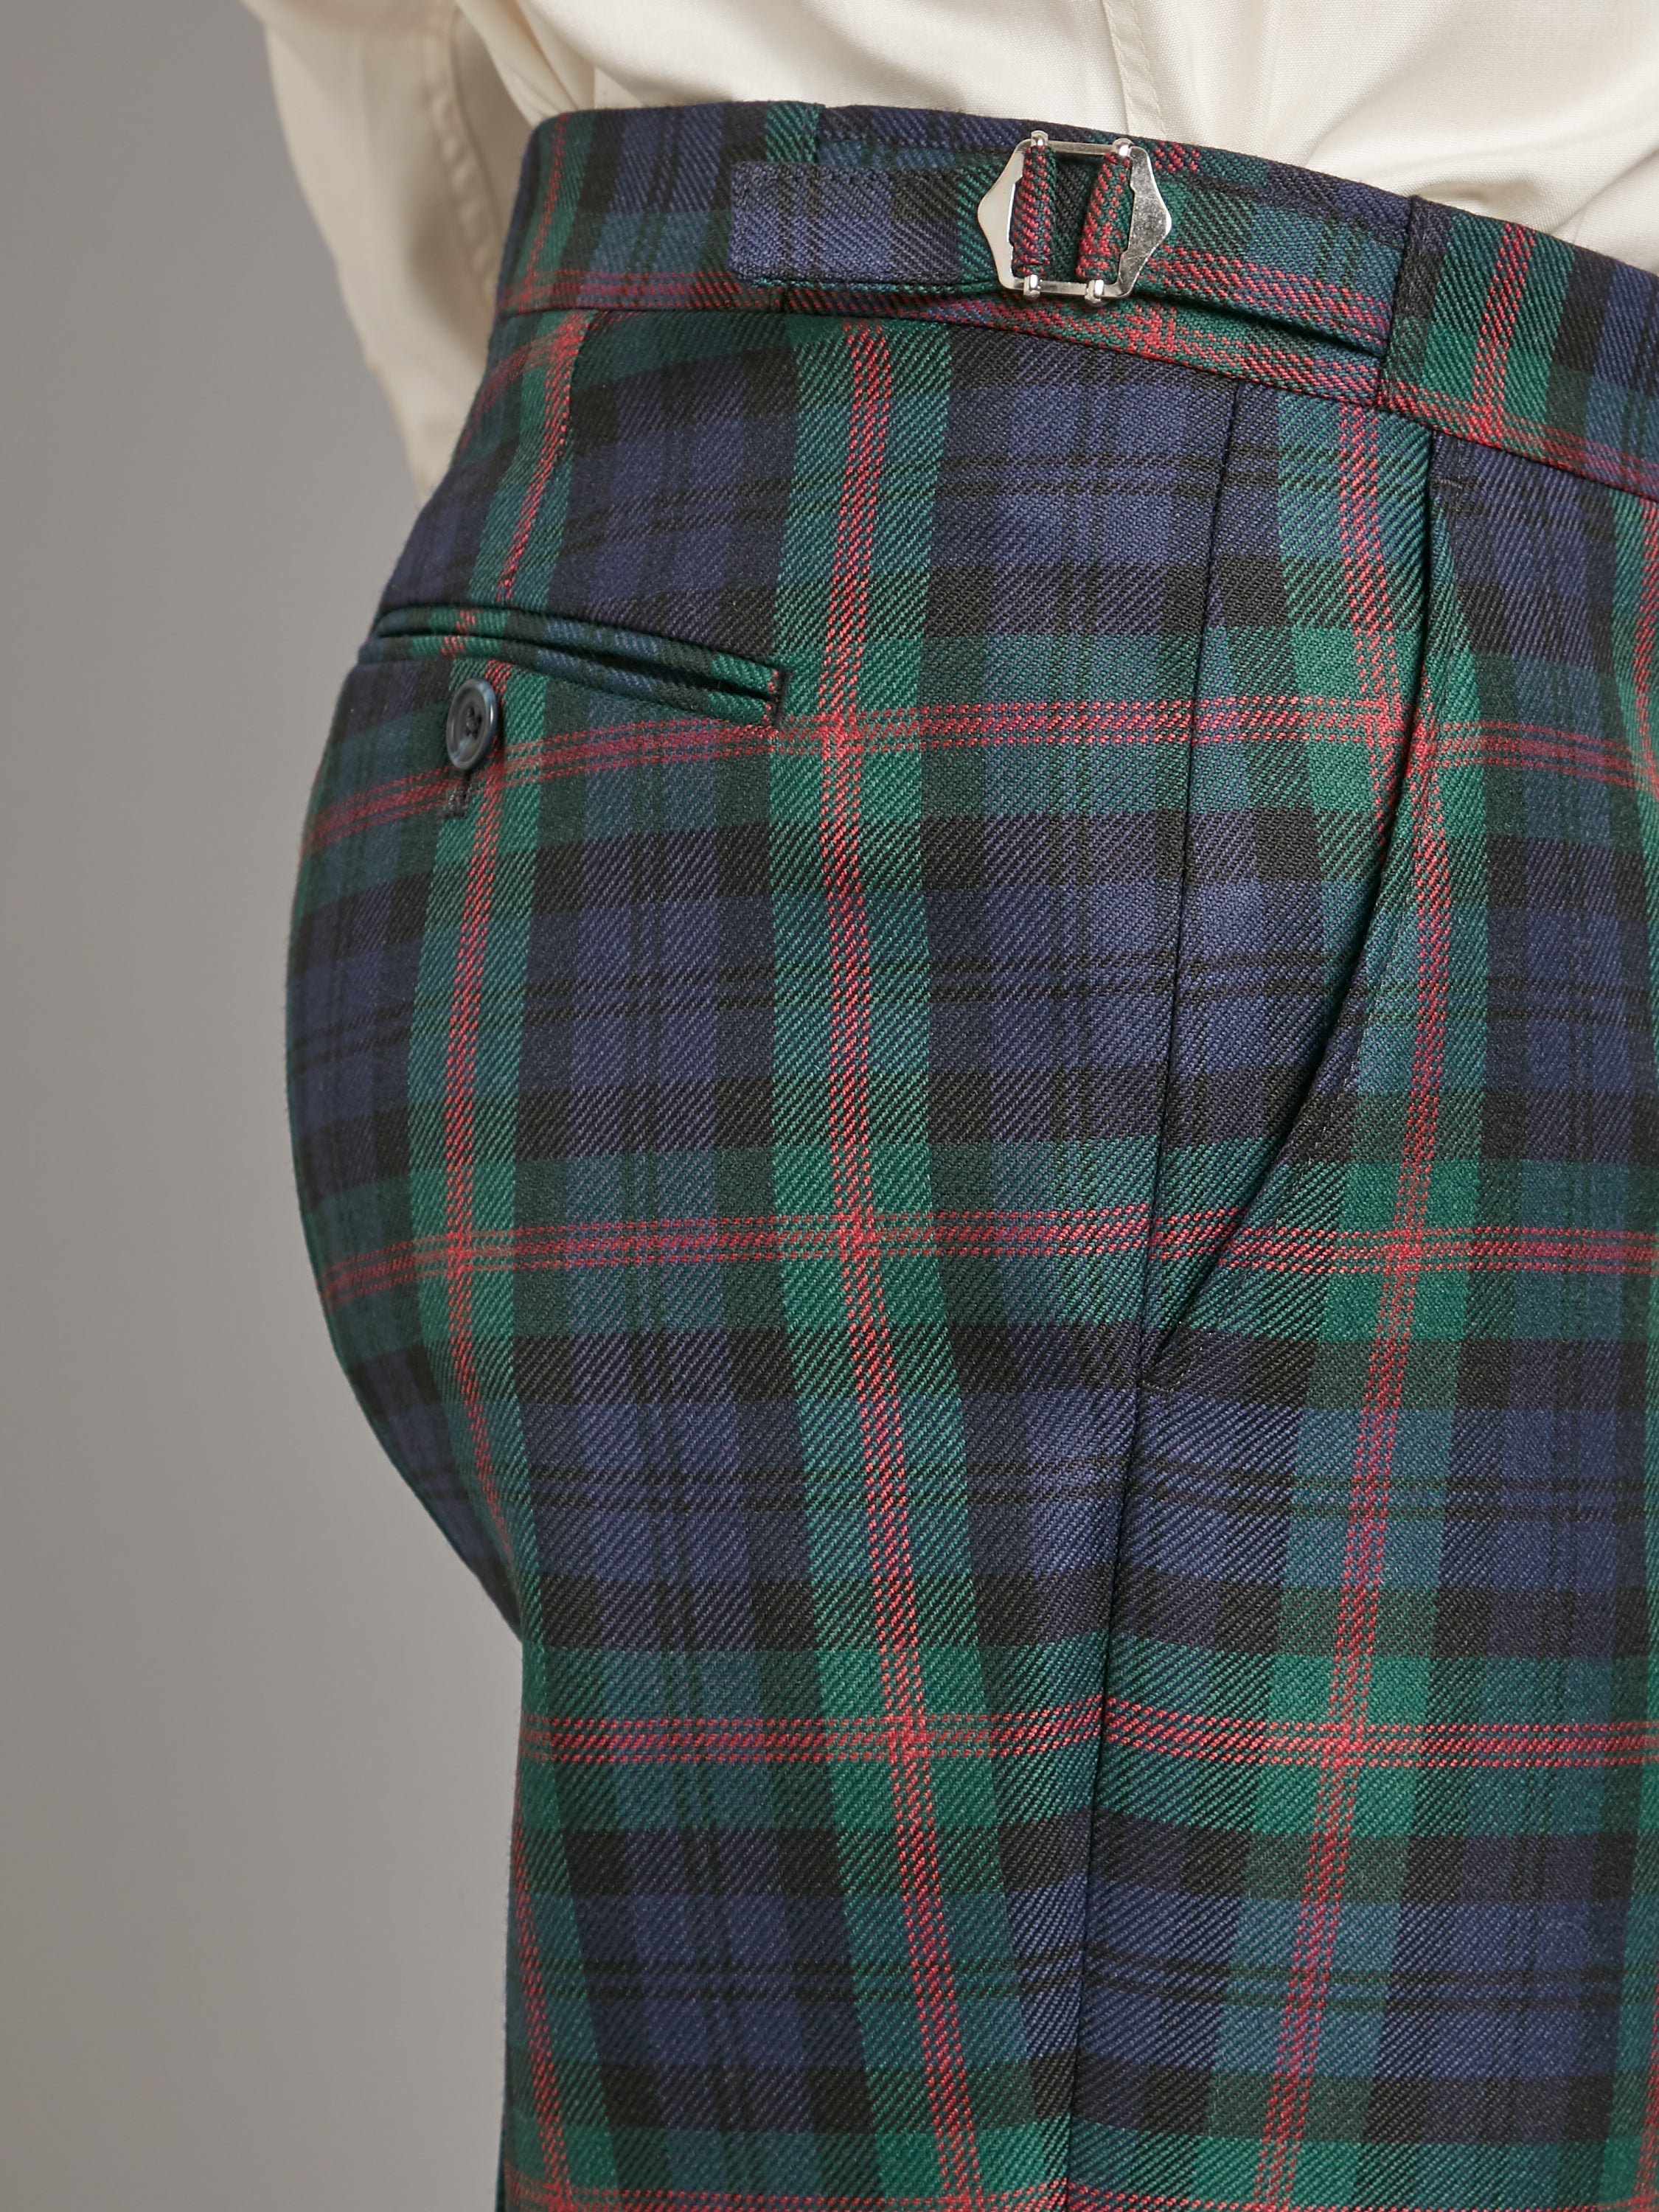 FRED PERRY TARTAN TROUSERS – Posers Hollywood